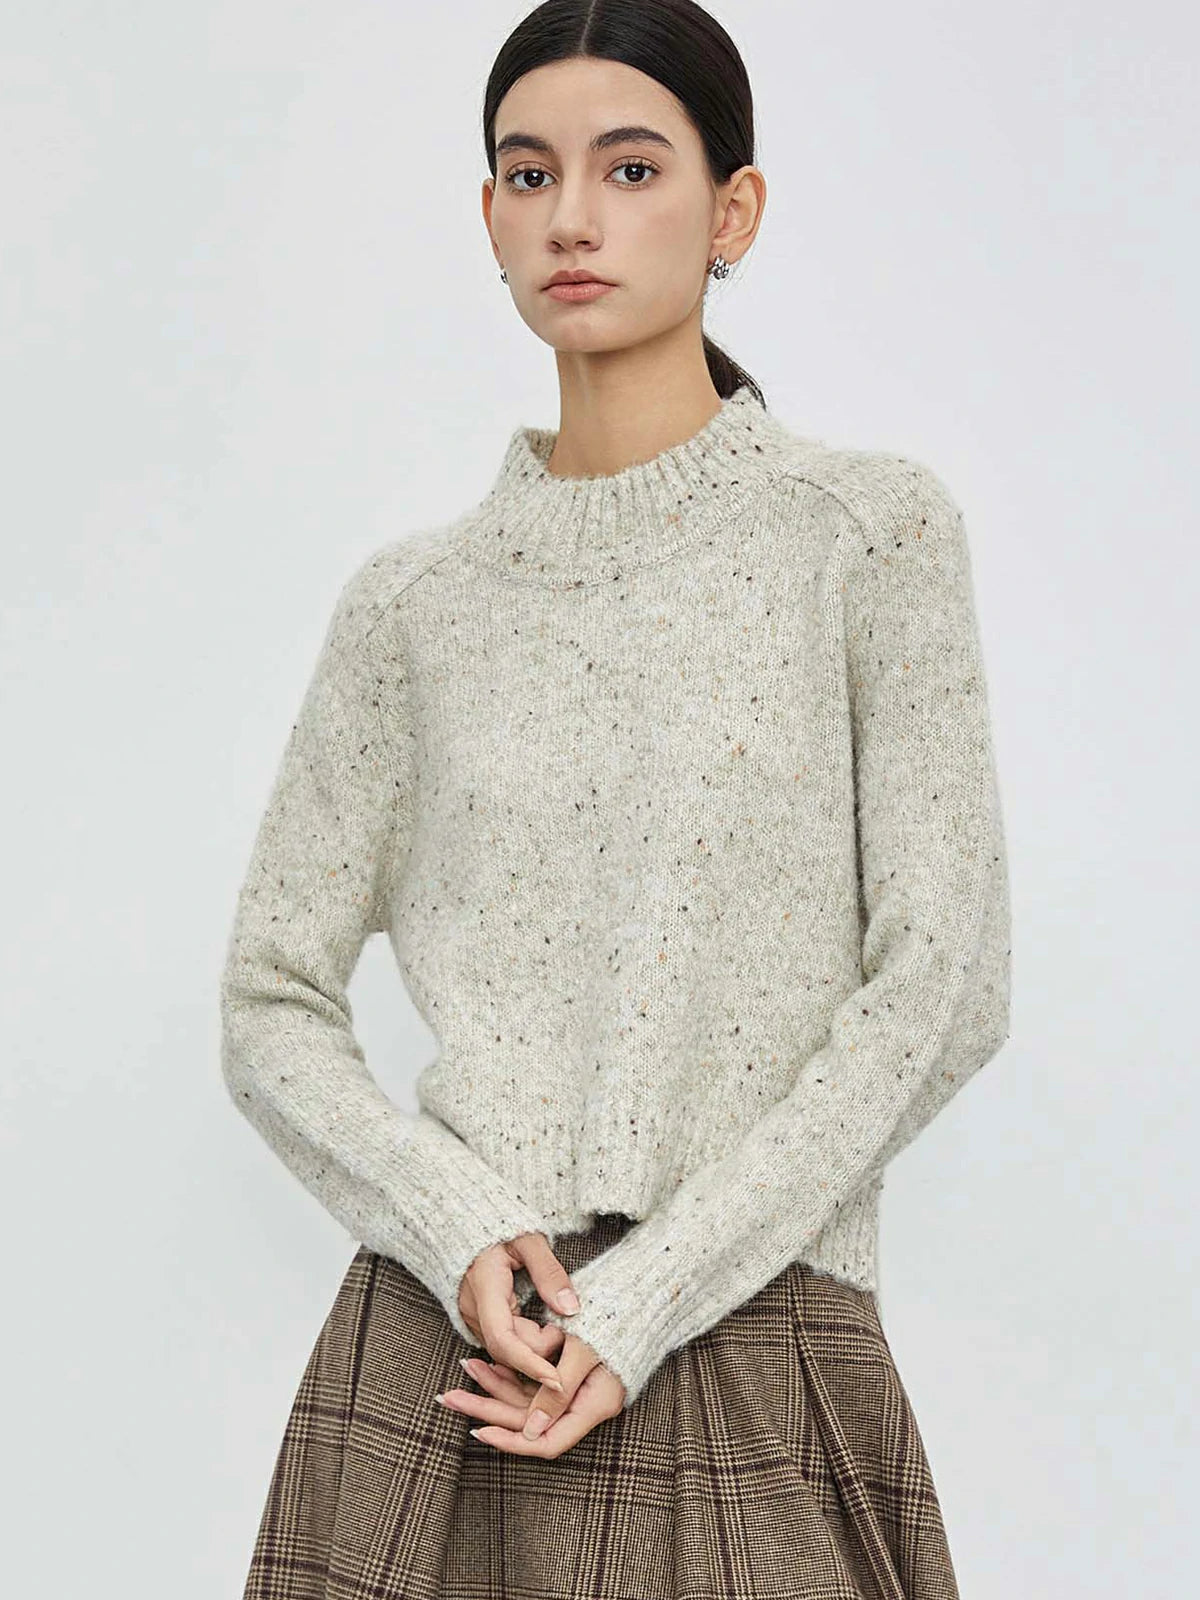 Fashion-Forward Knitwear: Ribbed Round Neck, Irregular Hem, and Dotted Allure